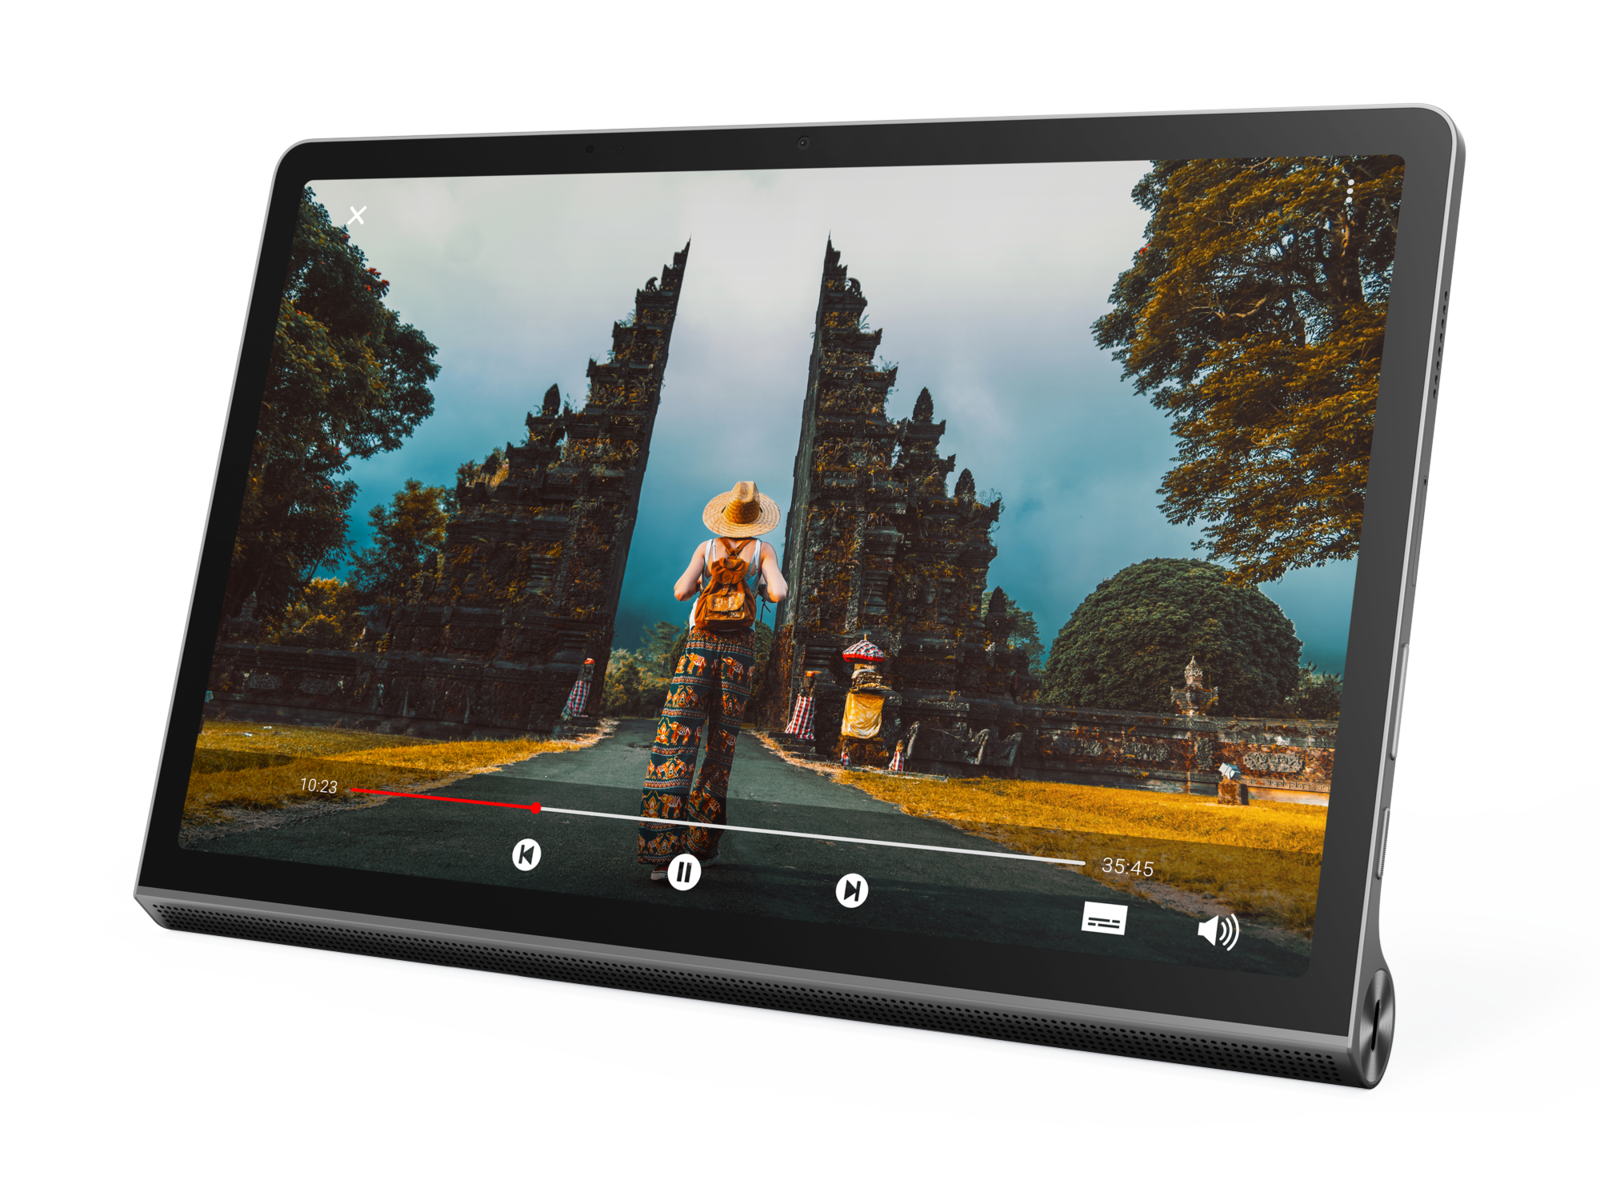 The Lenovo Yoga Tab 11 is an interesting new mid-range prospect in the